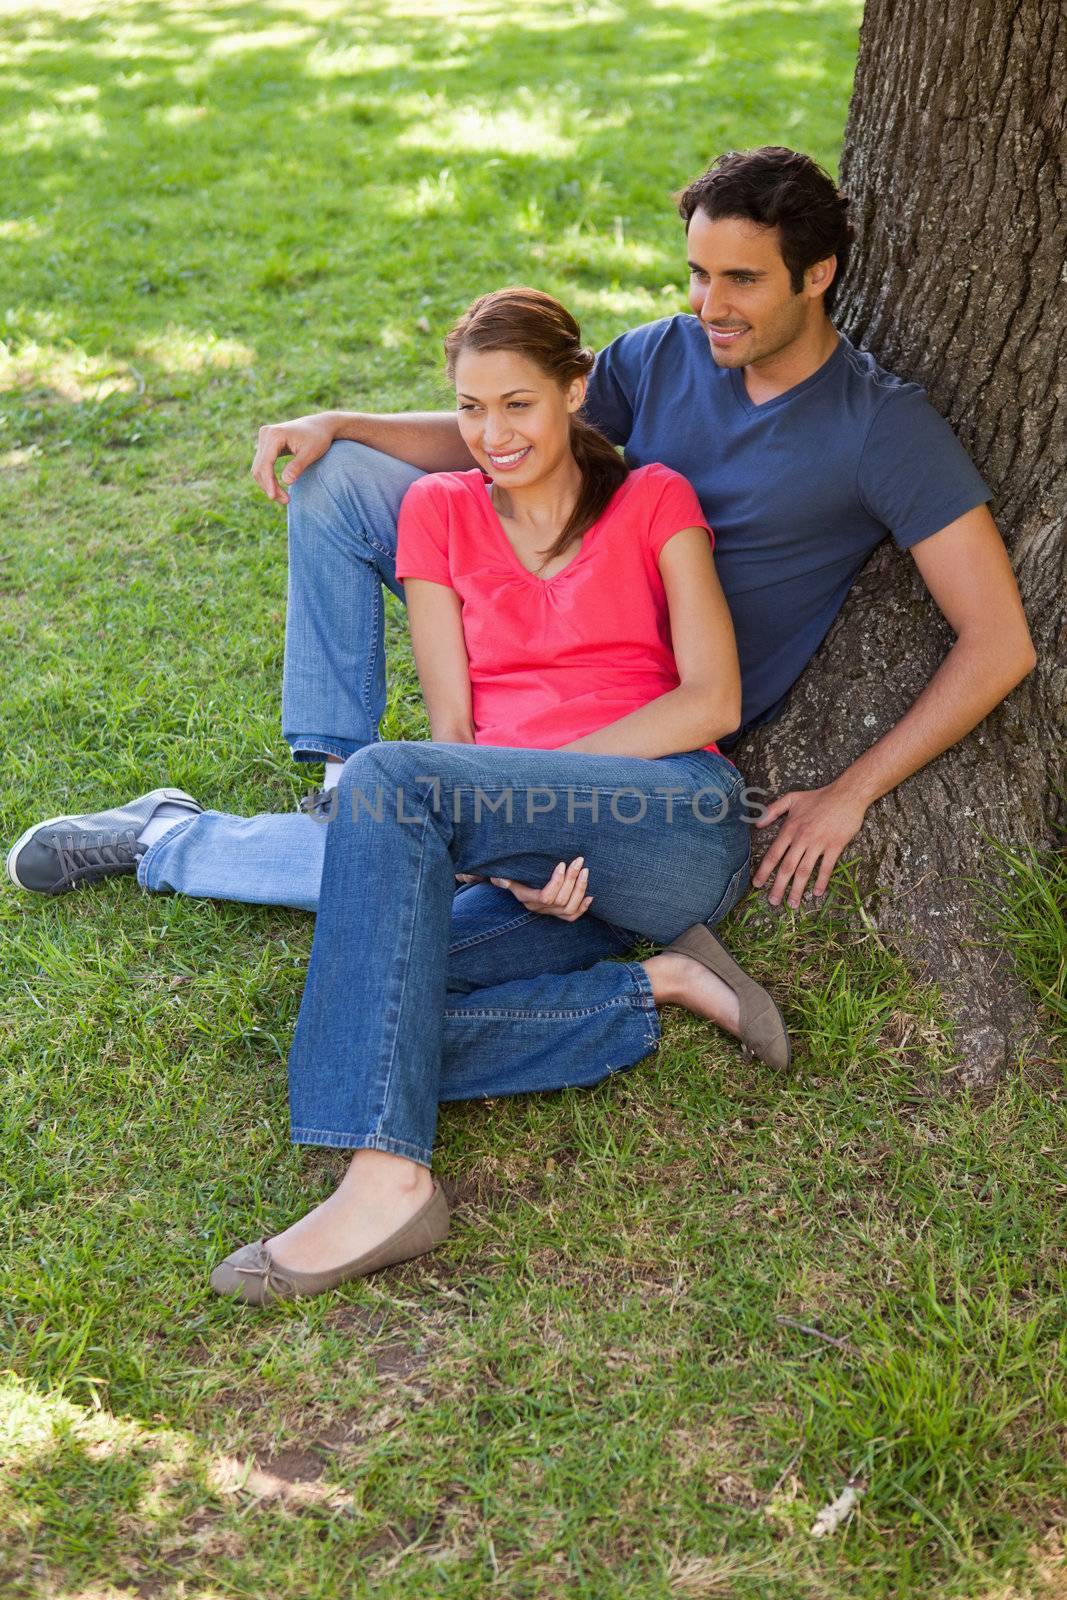 Two friends smiling as they sit together against the trunk of a tree